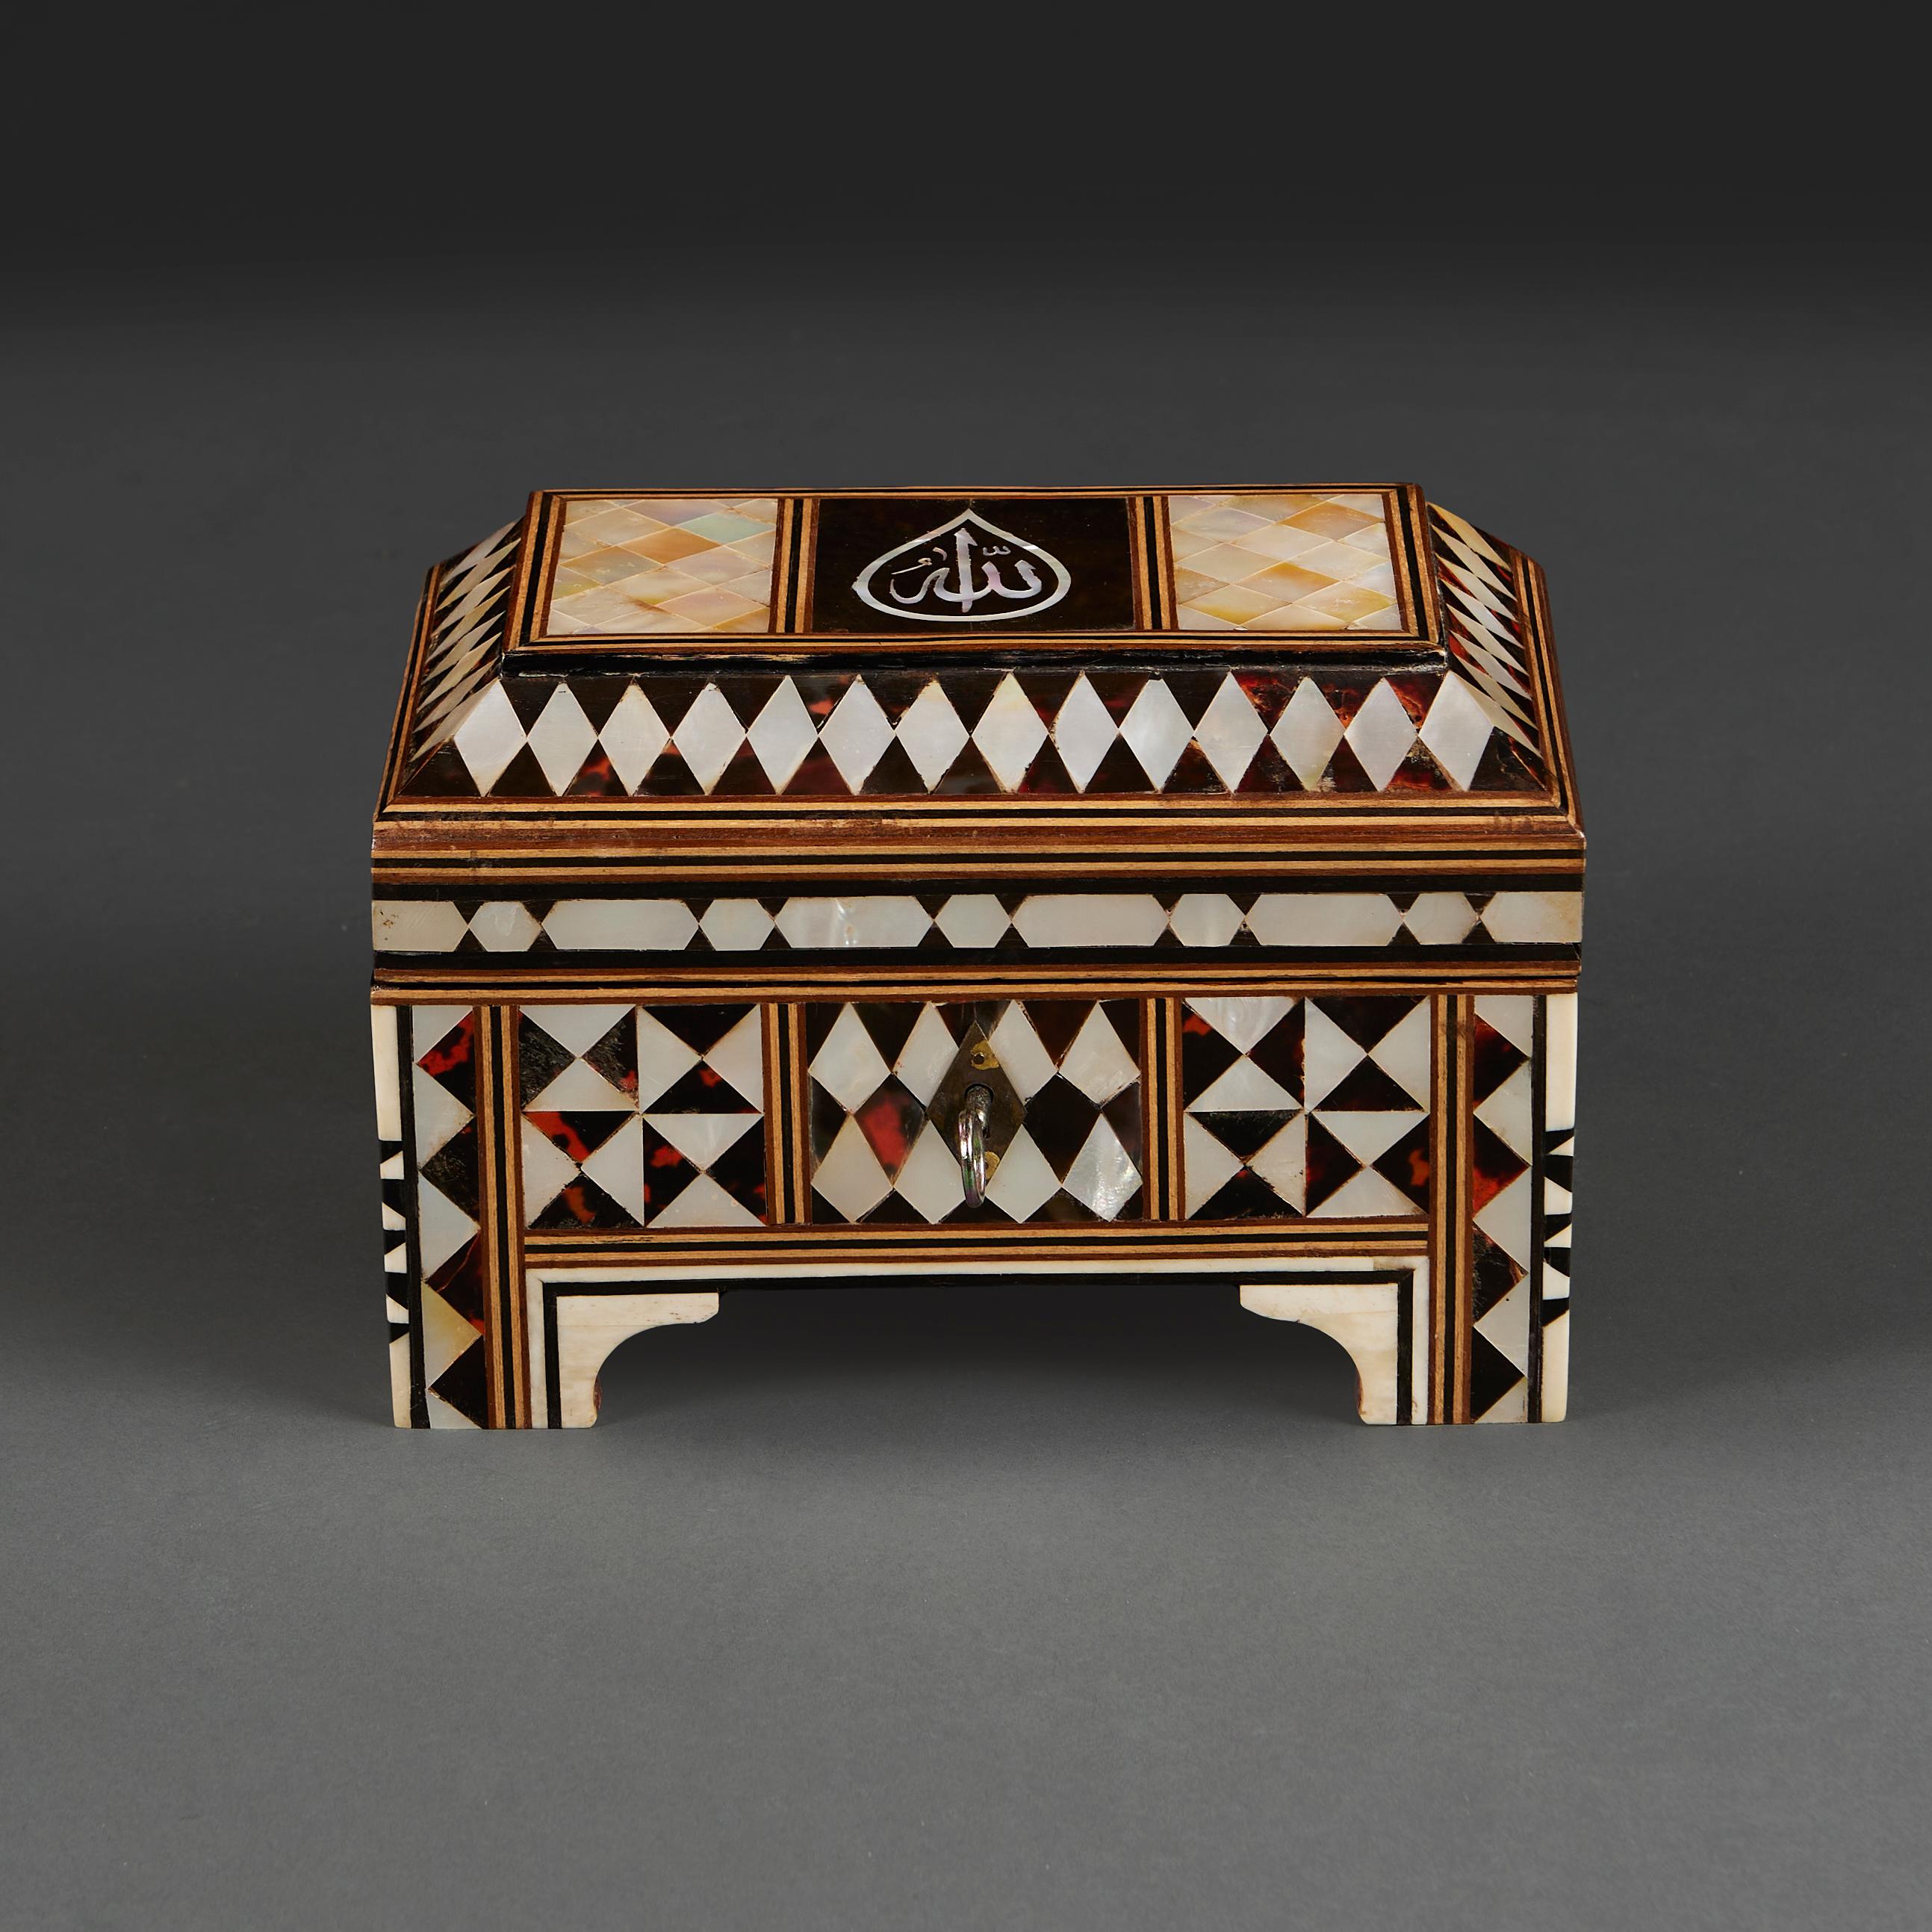 Turkey, circa 1900

An early twentieth century Ottoman casket of small scale, decorated throughout with inlaid mother of pearl and tortoiseshell, the lid opening to reveal a red lined interior.

Height    16.00cm
Width      23.00cm
Depth     14.00cm